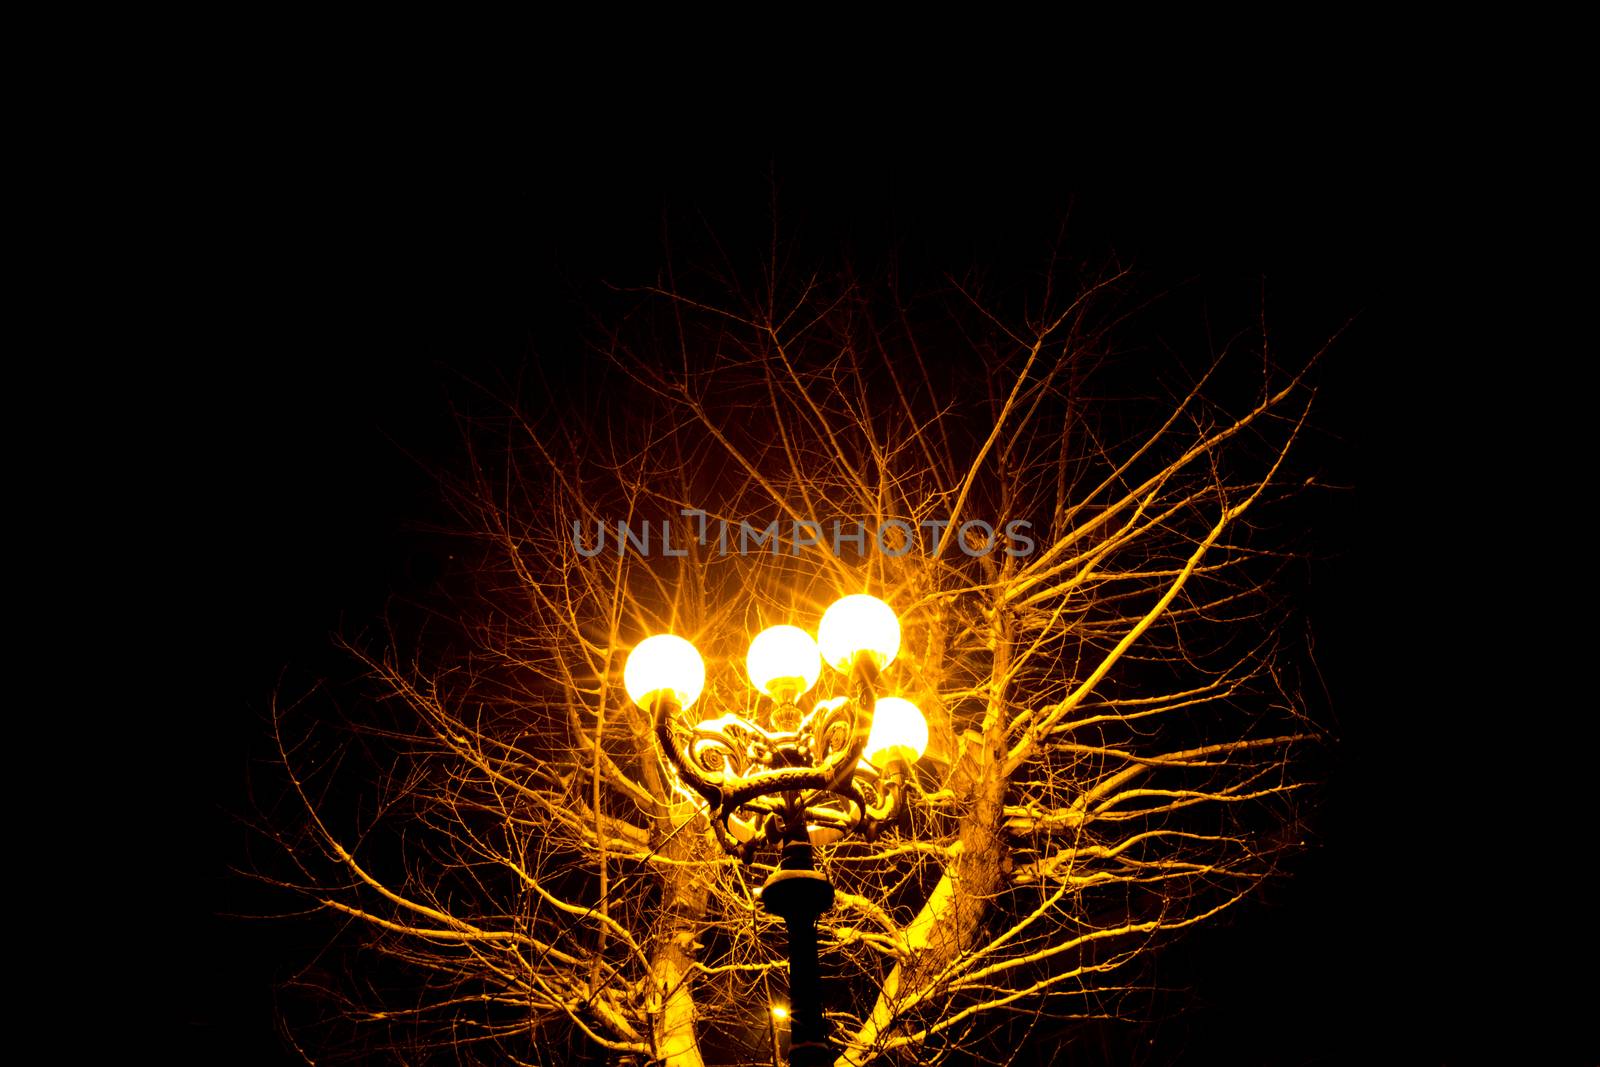 Antique yellow lantern at Night With a Tree in the Background